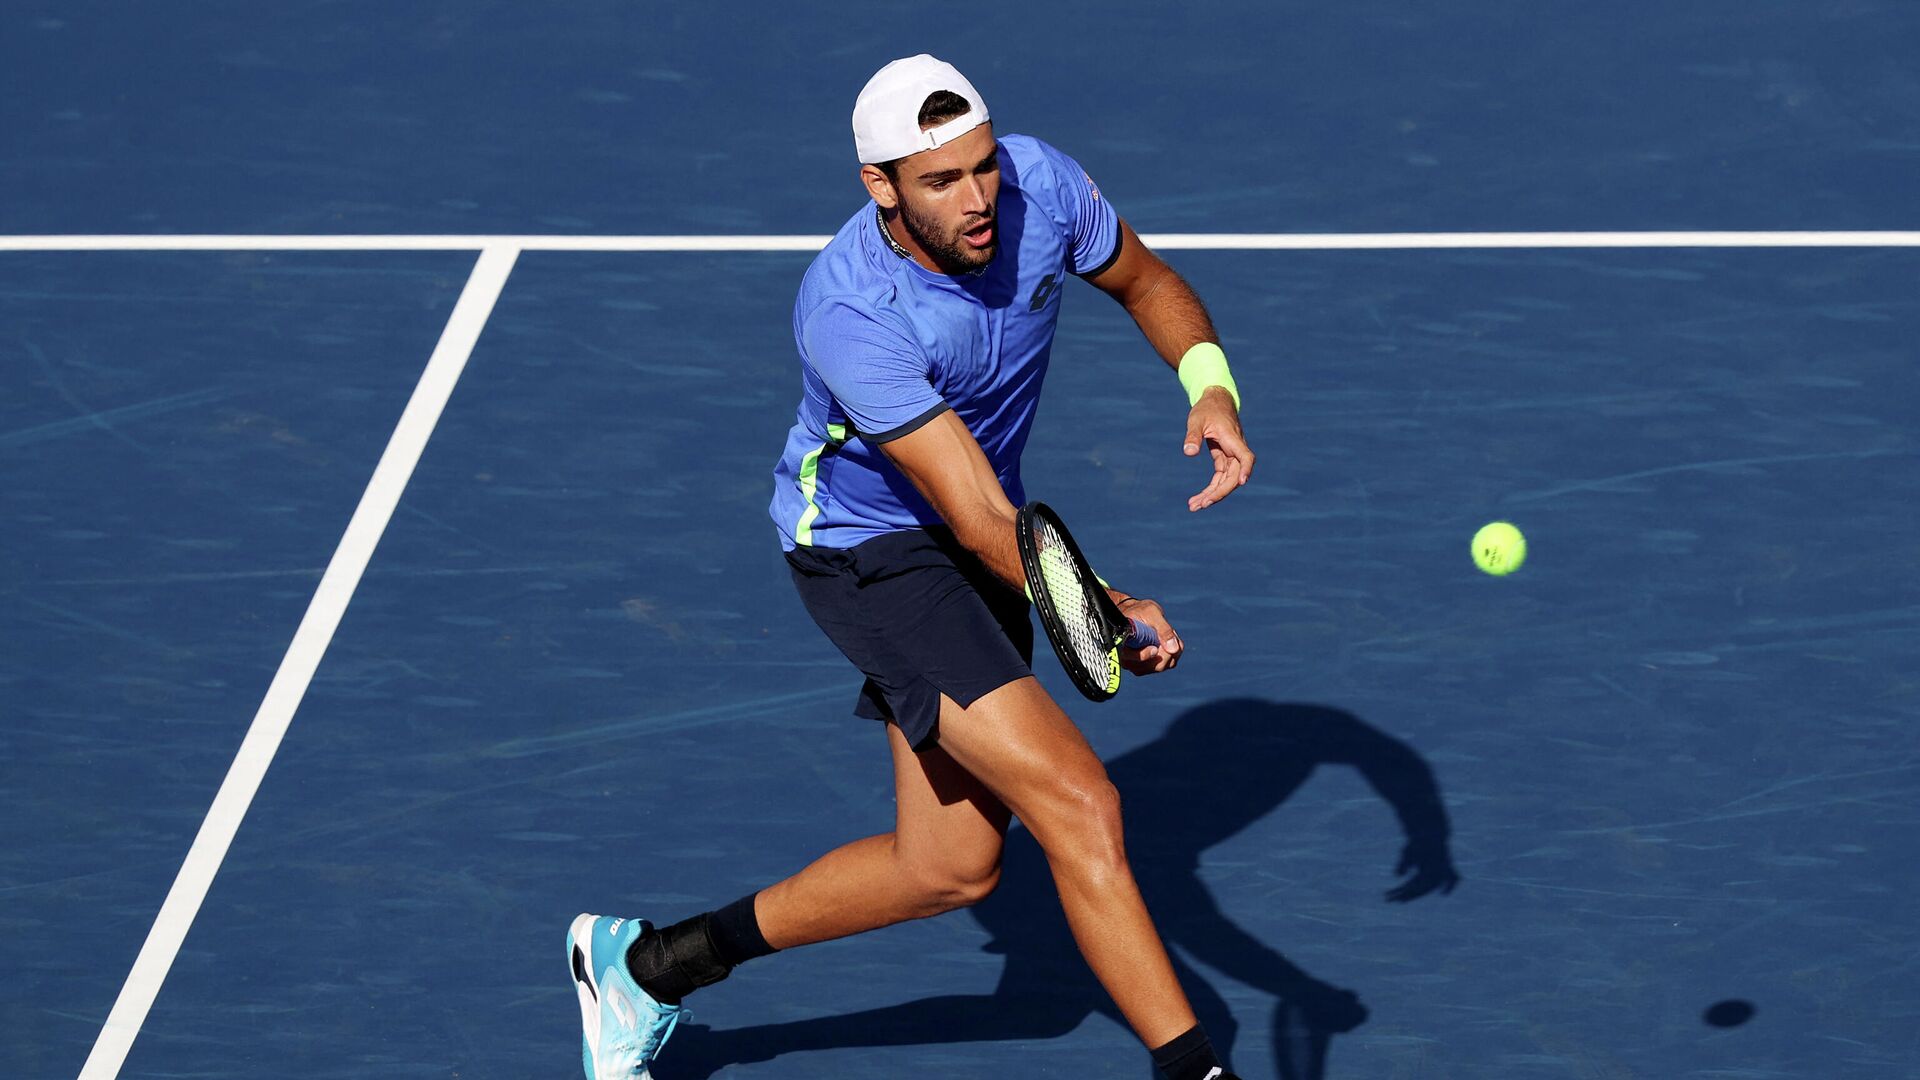 NEW YORK, NEW YORK - SEPTEMBER 02: Matteo Berrettini of Italy returns against Corentin Moutet of France during his Men's Singles second round match on Day Four of the 2021 US Open at USTA Billie Jean King National Tennis Center on September 02, 2021 in New York City.   Matthew Stockman/Getty Images/AFP (Photo by MATTHEW STOCKMAN / GETTY IMAGES NORTH AMERICA / Getty Images via AFP) - РИА Новости, 1920, 03.09.2021